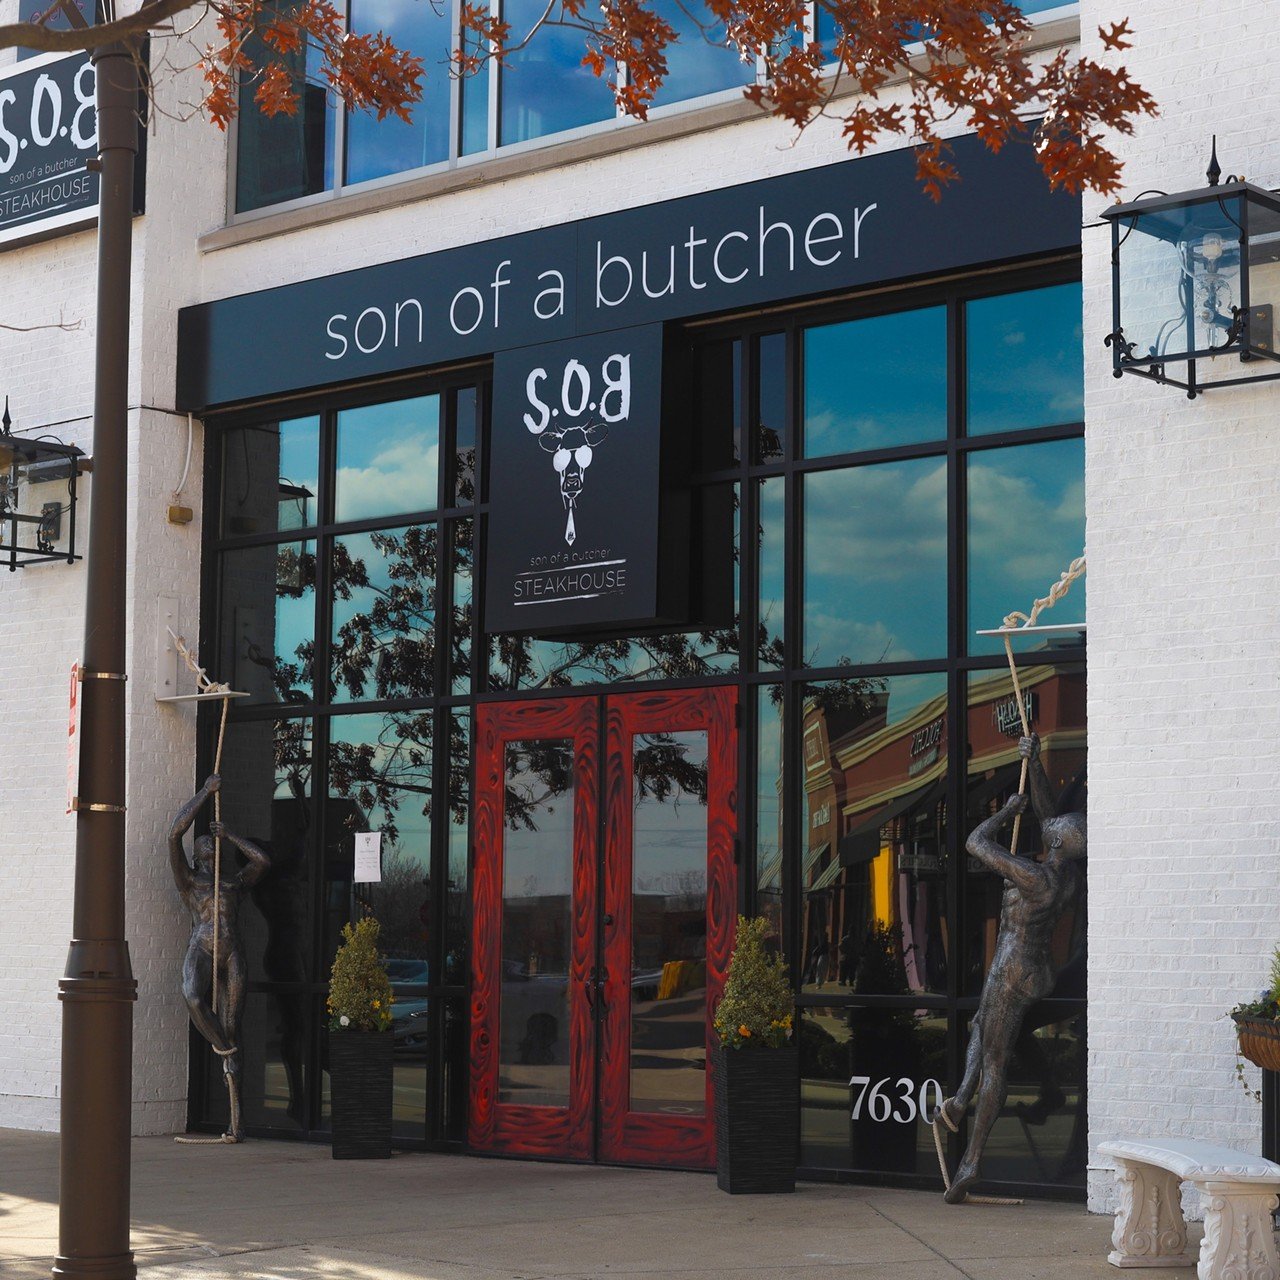 Son of a Butcher
7630 Gibson St., Liberty Township
The team behind Agave & Rye seems to have conquered the eccentric taco world and has now set its sights on steakhouses. The company’s new Son of a Butcher — colloquially referred to as S.O.B. — opened March 1 at Shindig Park, an event space in Liberty Center also helmed by the Agave & Rye team. Yavonne Sarber, founder of S.O.B. and Agave & Rye, tells CityBeat via email that the restaurant is “evolving the stuffy steakhouse into something magical.” Sarber says the look of S.O.B. plays off the same ethos of the Alice-in-Wonderland-meets-Baroque design of the Agave & Rye locations. Sarber says the menu features “something for everyone,” highlighting USDA Prime cuts, wagyu, caviar, shaved truffles and “gold leaf options.” There is a sweet and spicy bacon and blue cheese burger and a chopped salad. For vegetarians, look for cauliflower steaks and black truffle gnocchi.